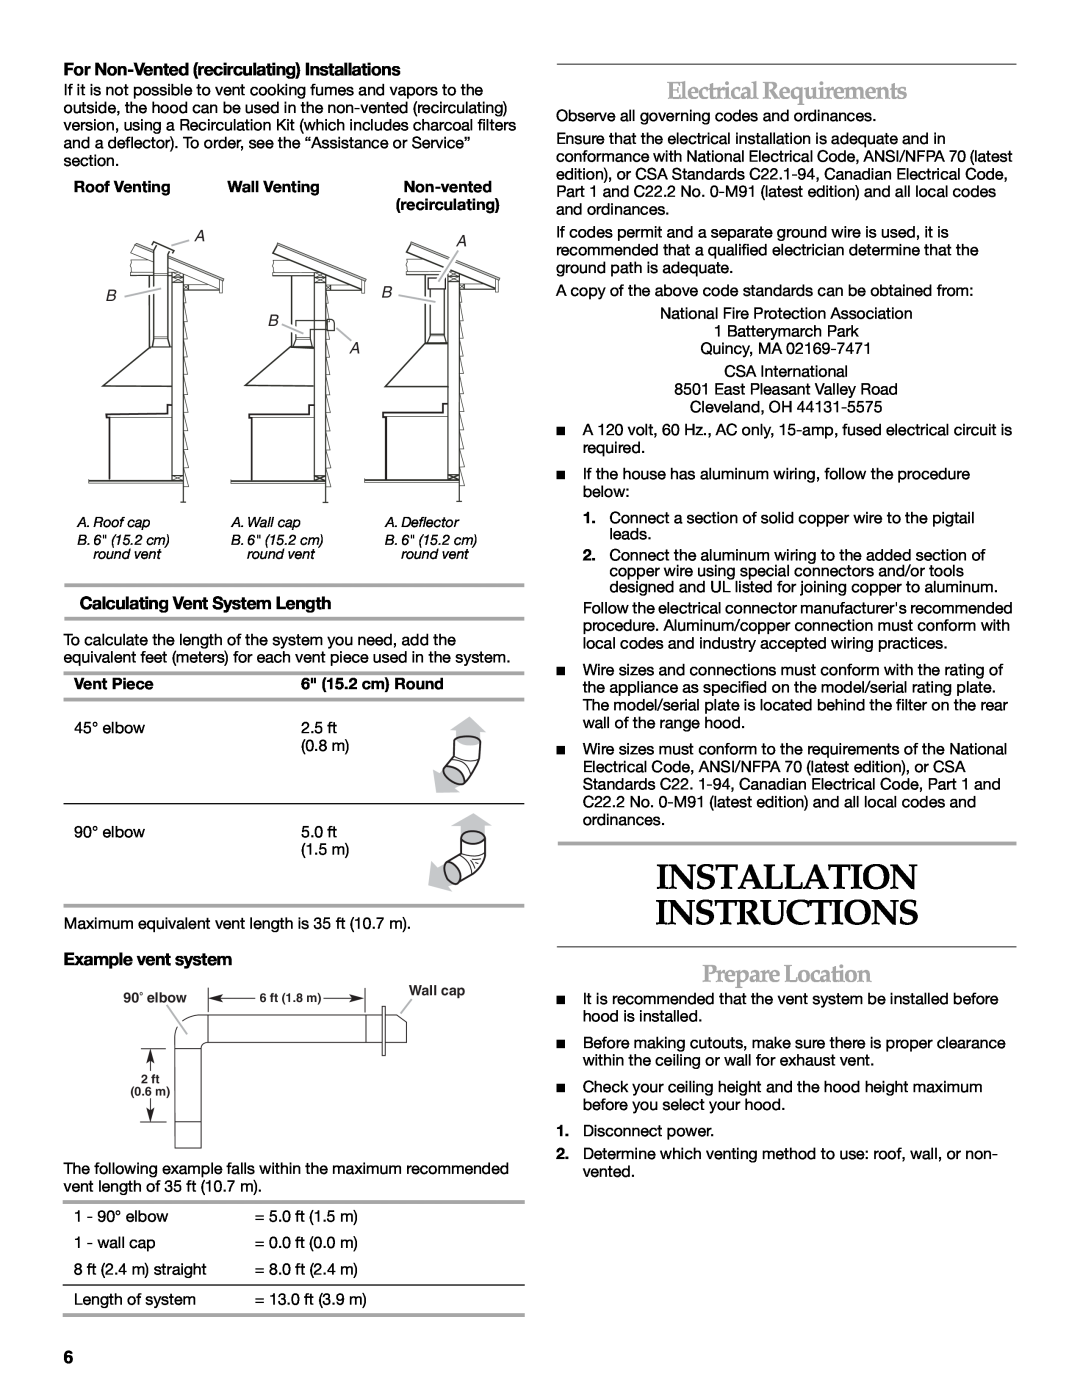 KitchenAid LI3Y7C/W10322991C Installation Instructions, Electrical Requirements, Prepare Location, Example vent system 